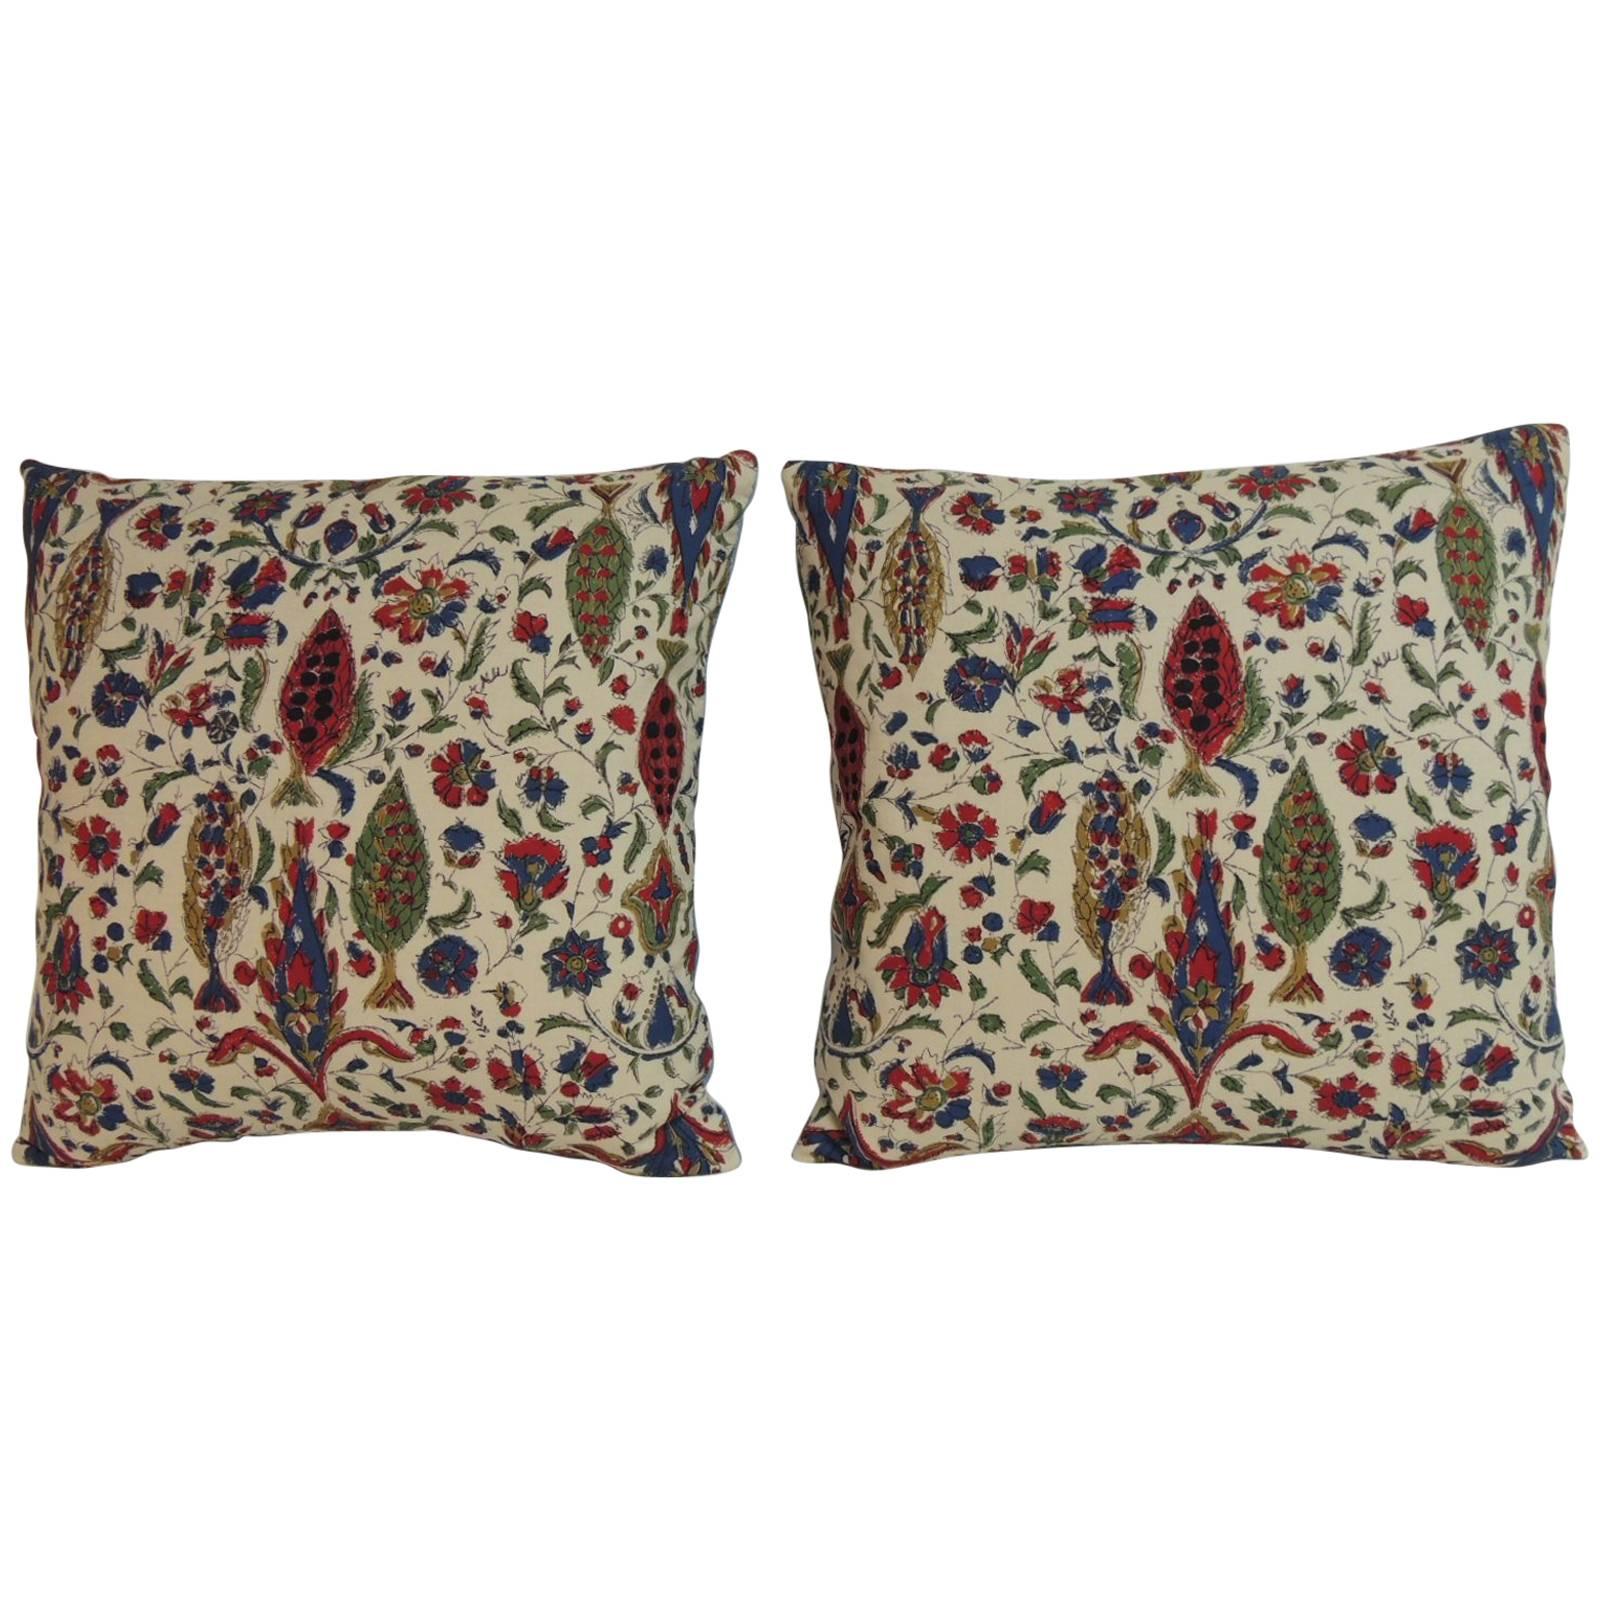 Pair of Vintage Indian Decorative Paisley Pillows